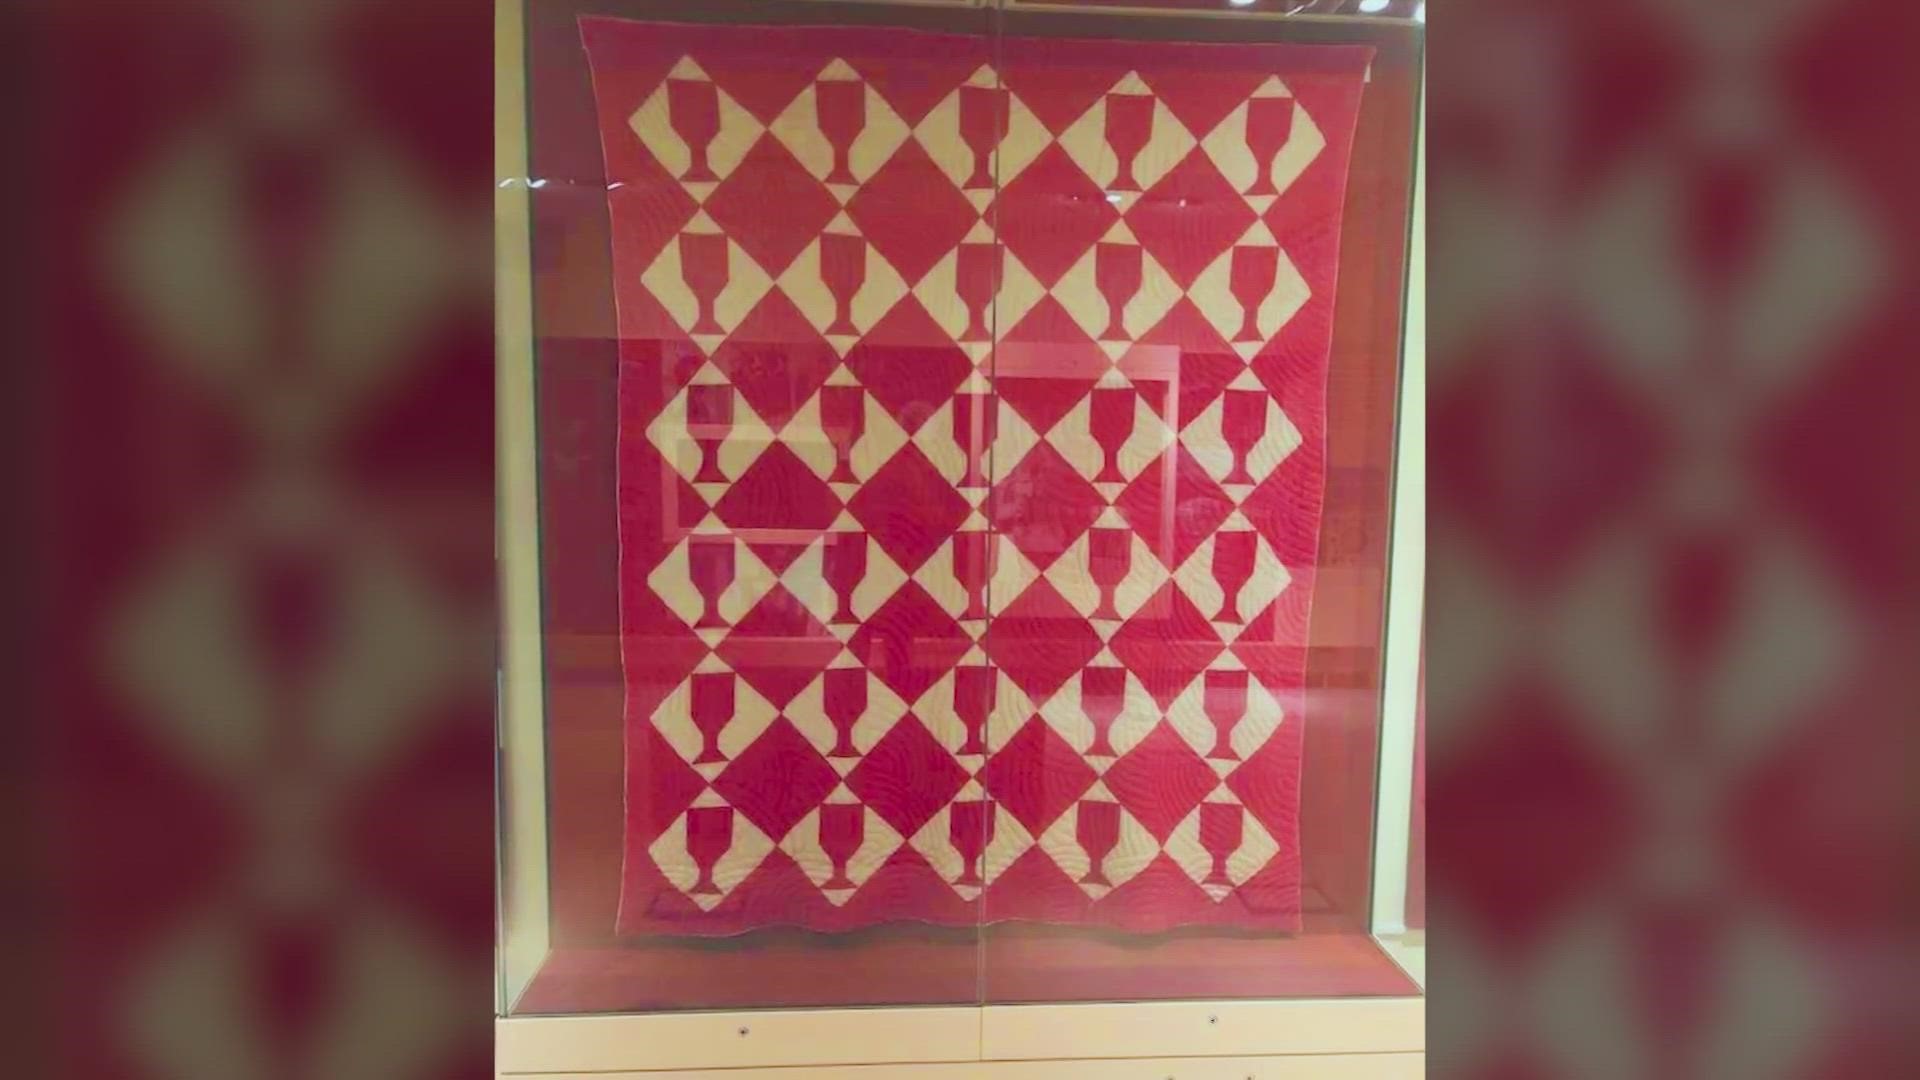 The “Chalice Quilt” has been on display at the American Museum and Gardens in Britain for 40 years, but a Dallas man is on a mission to bring it back to its home.